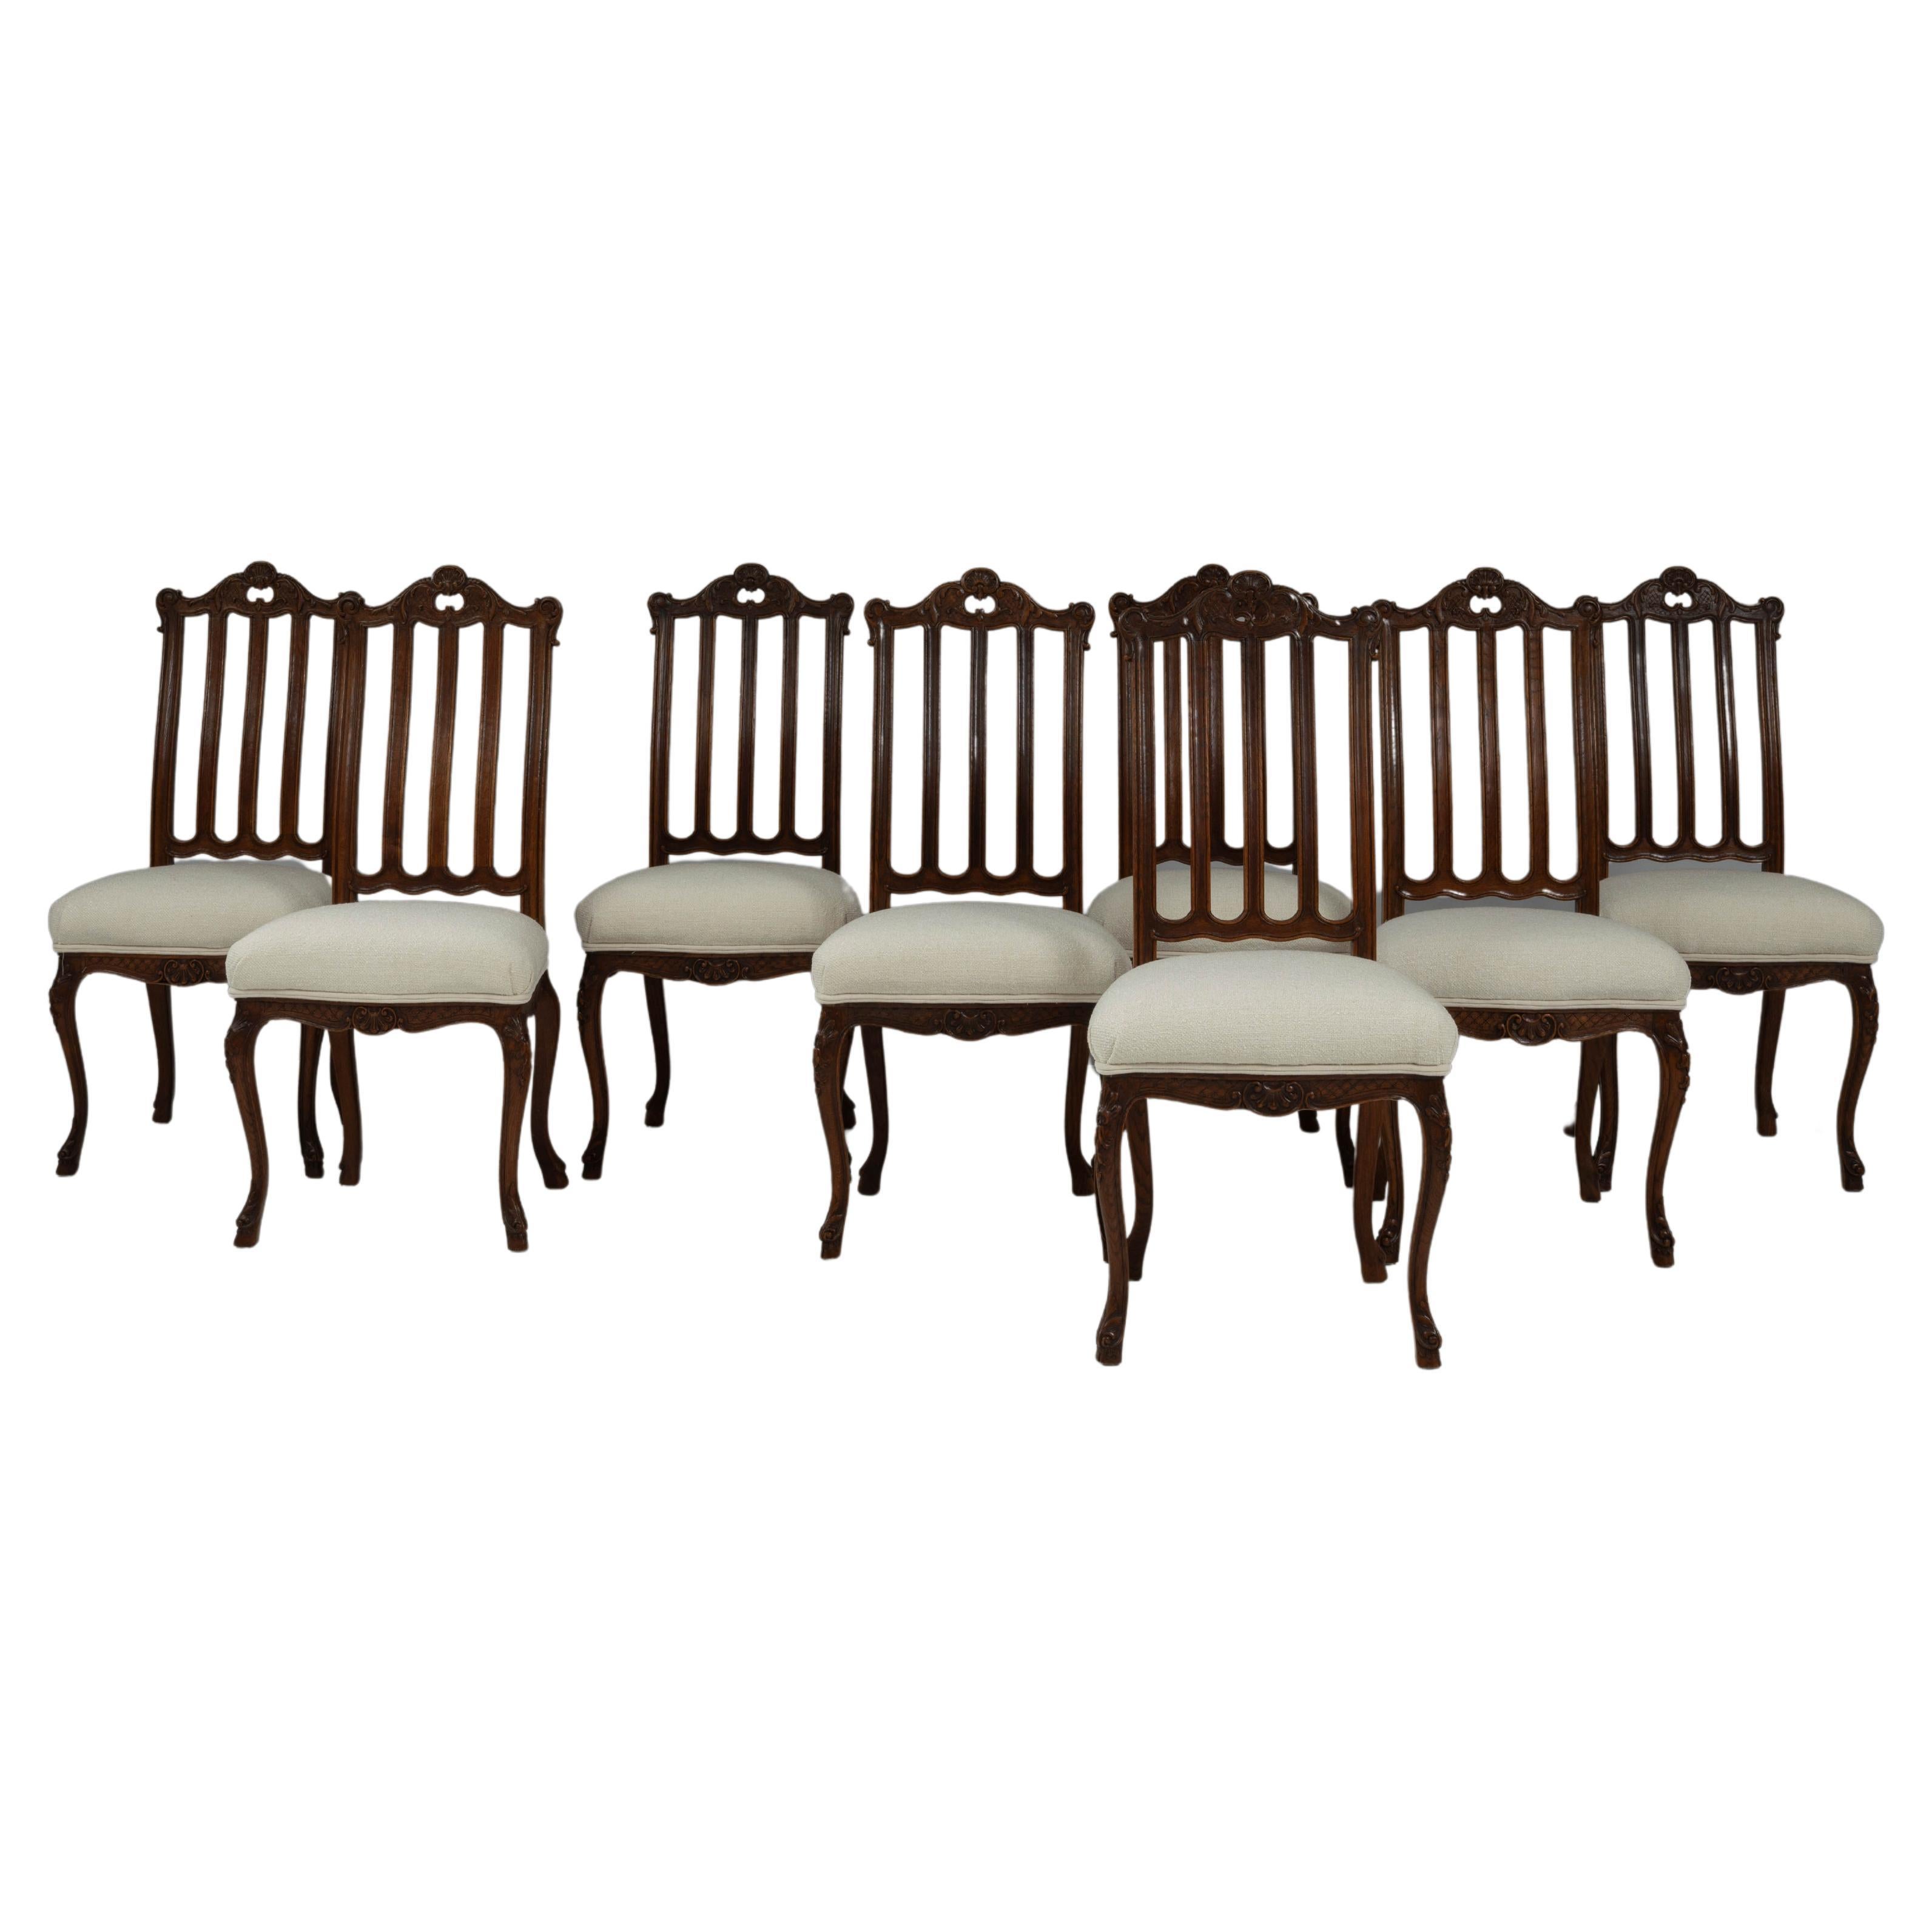 20th Century French Upholstered Dining Chairs, Set of 8